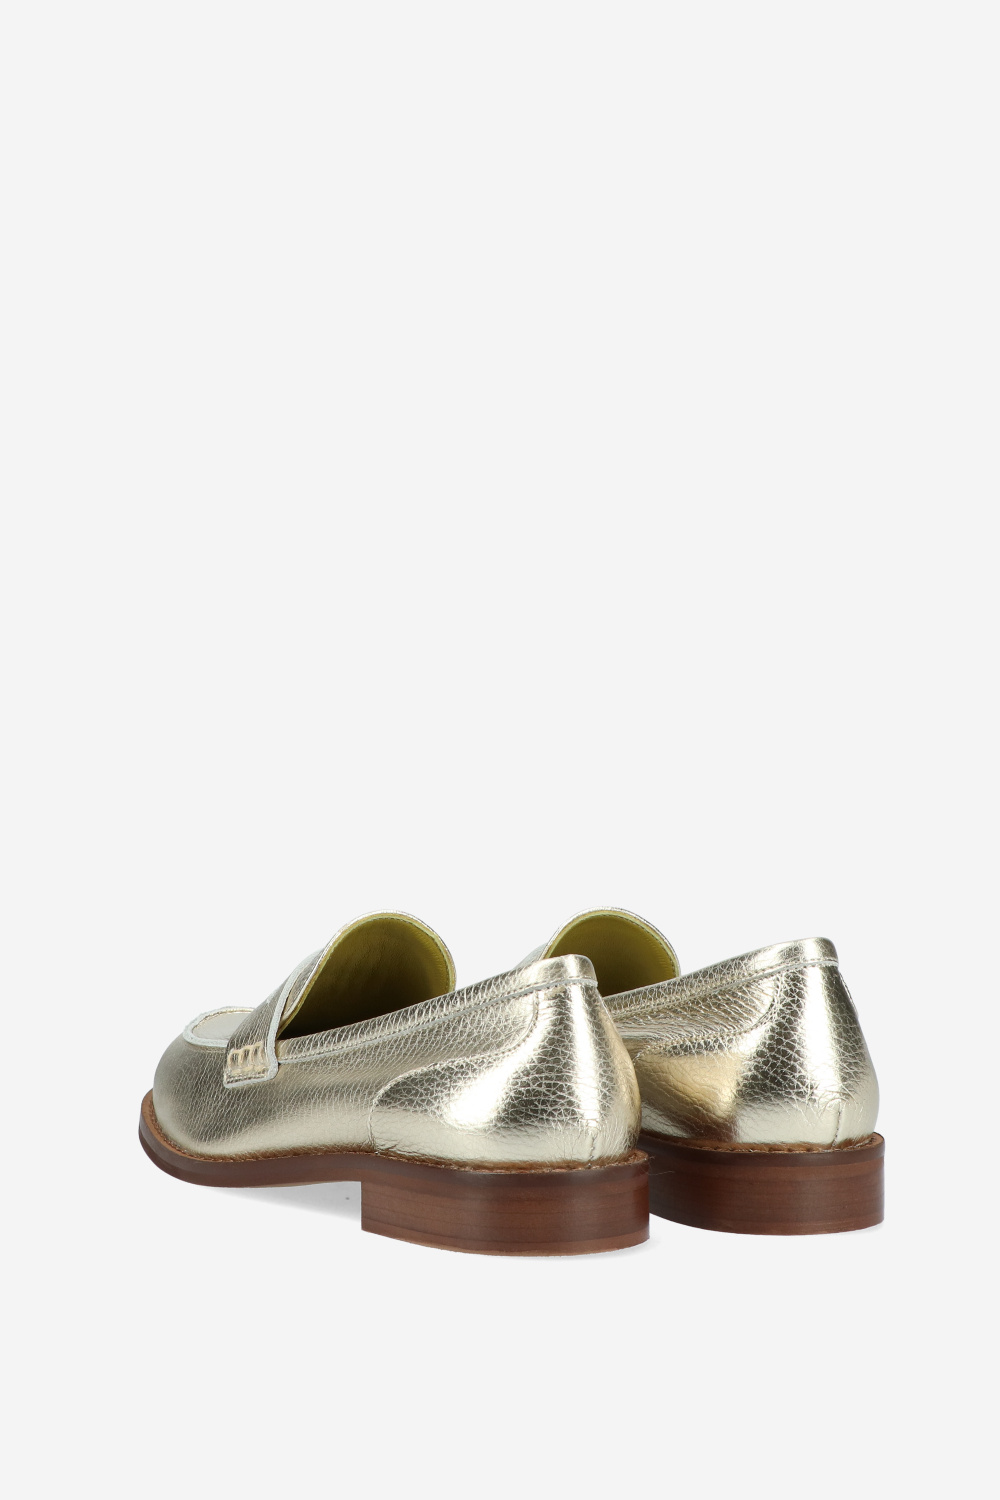 Laura Ricci Loafers Gold